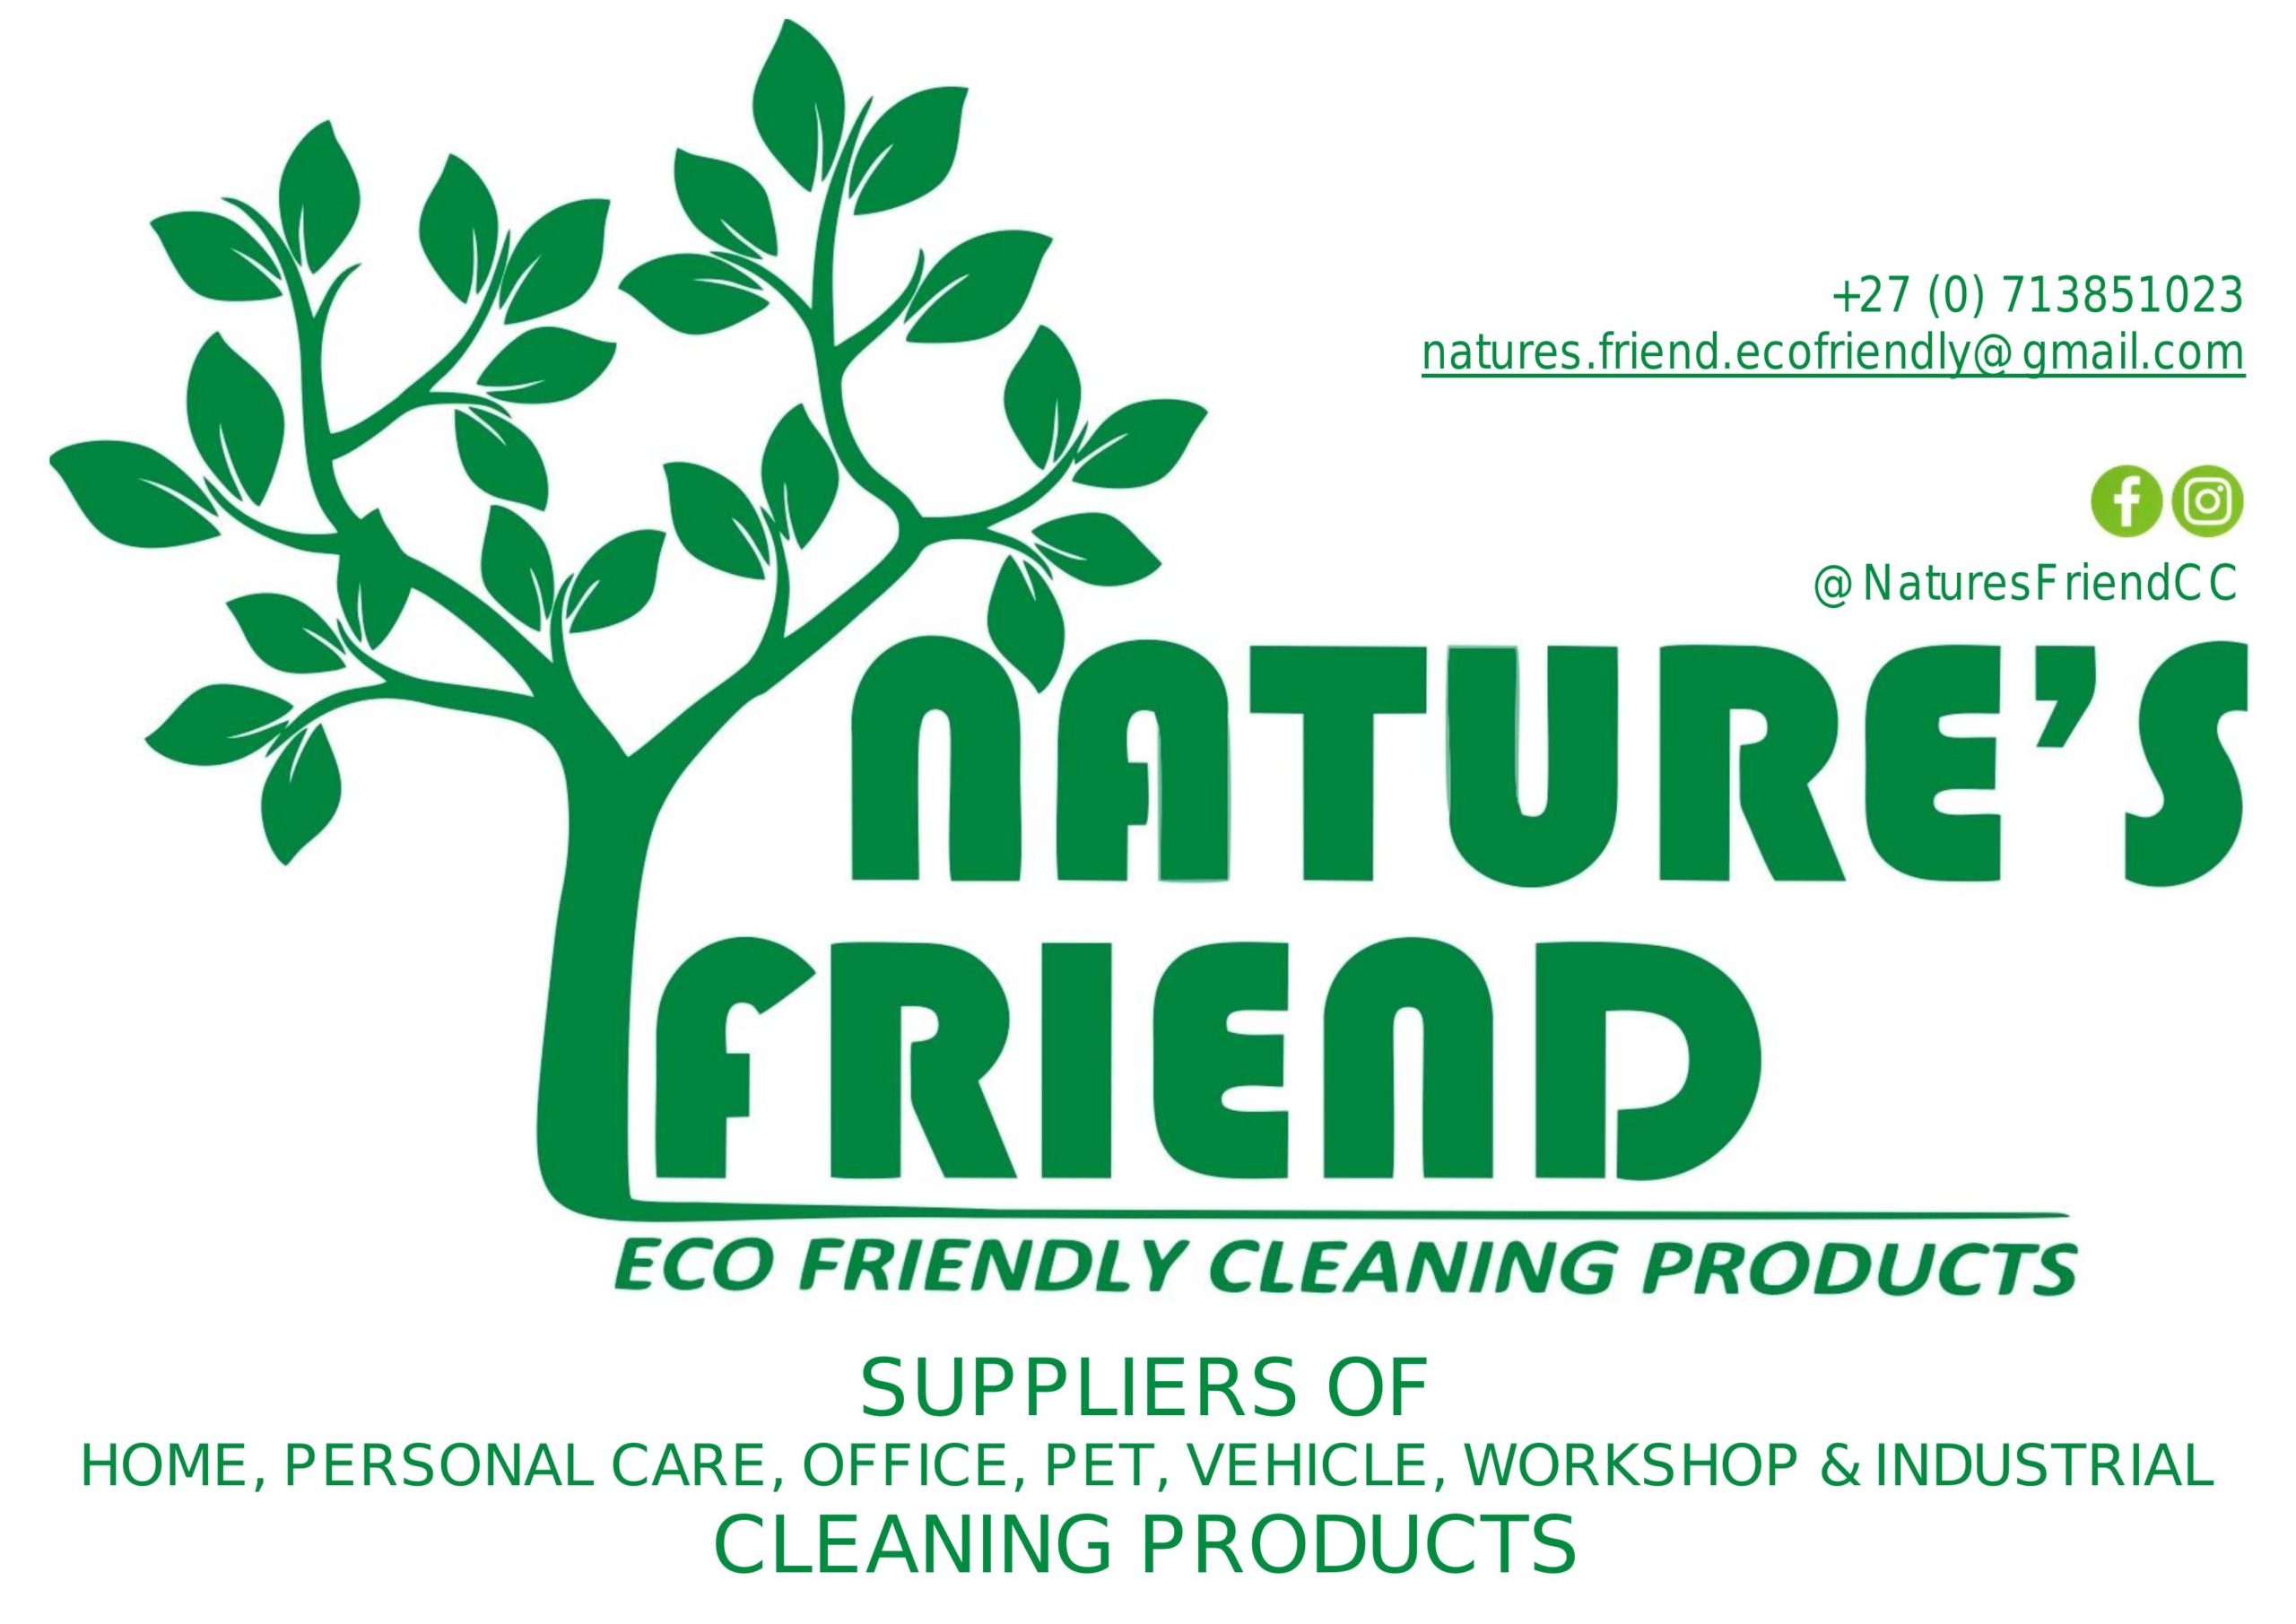 Nature's Friend Eco-friendly products